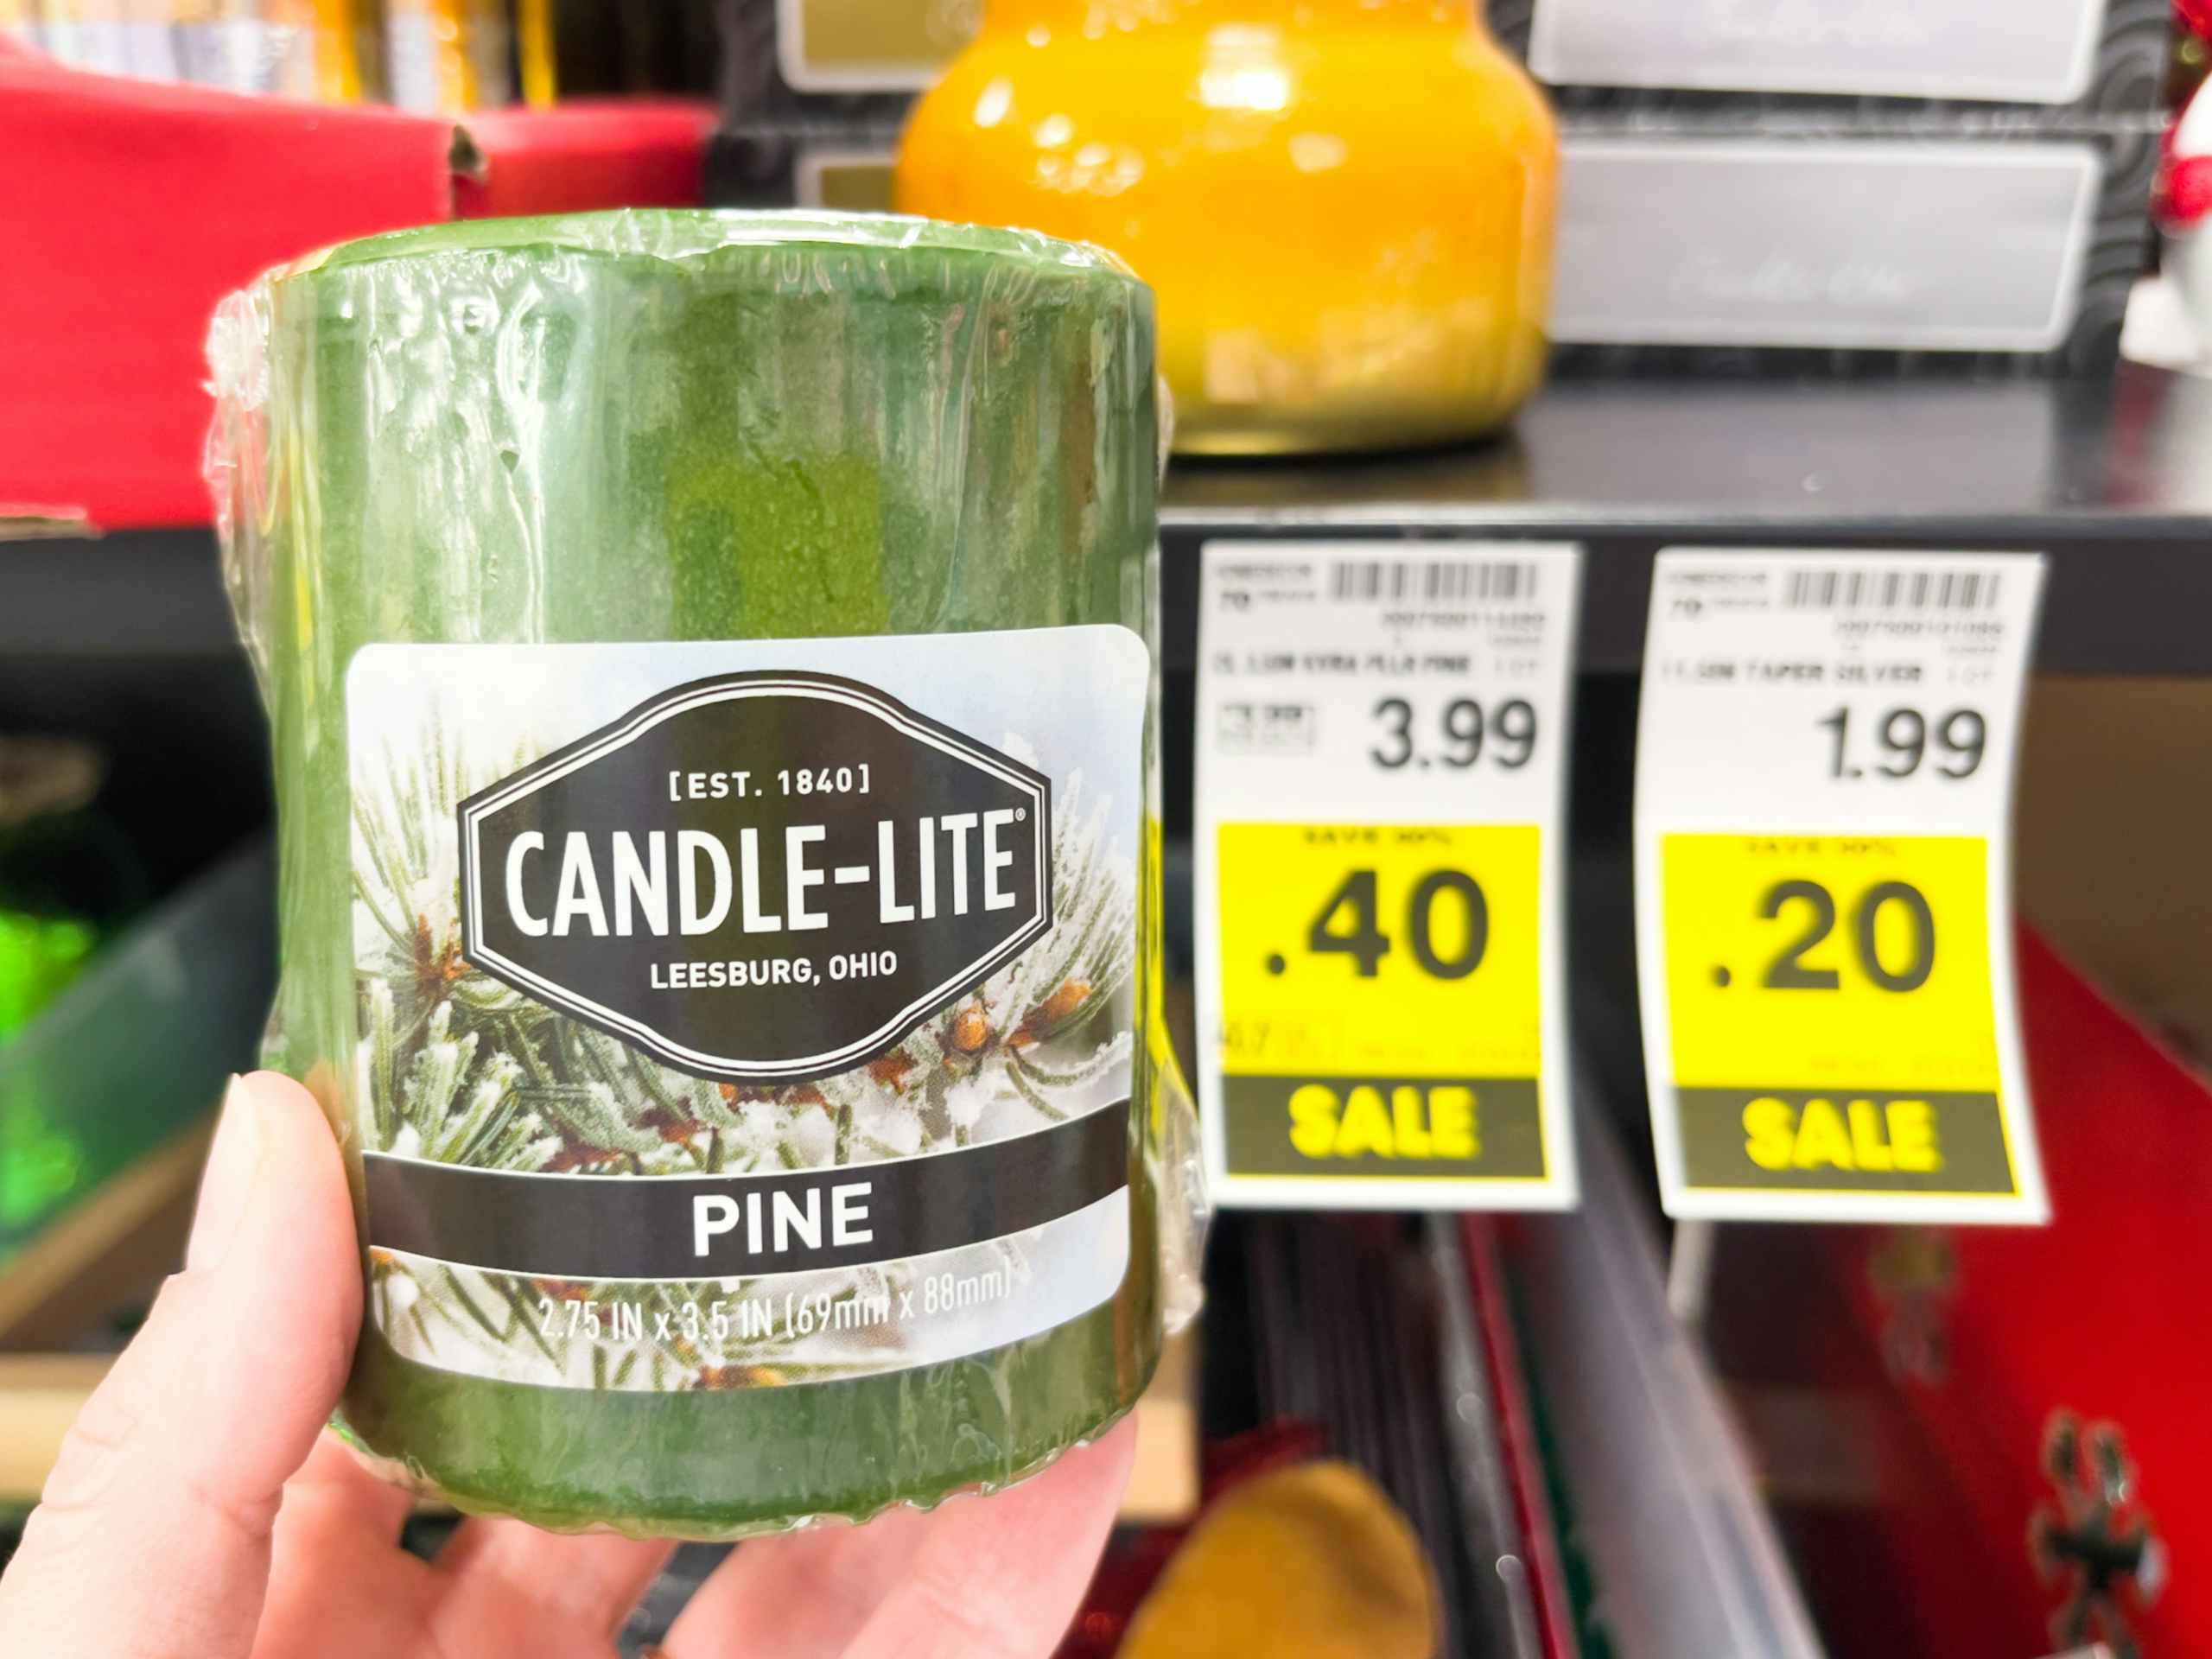 A candle held out by hand in front of price stickers.